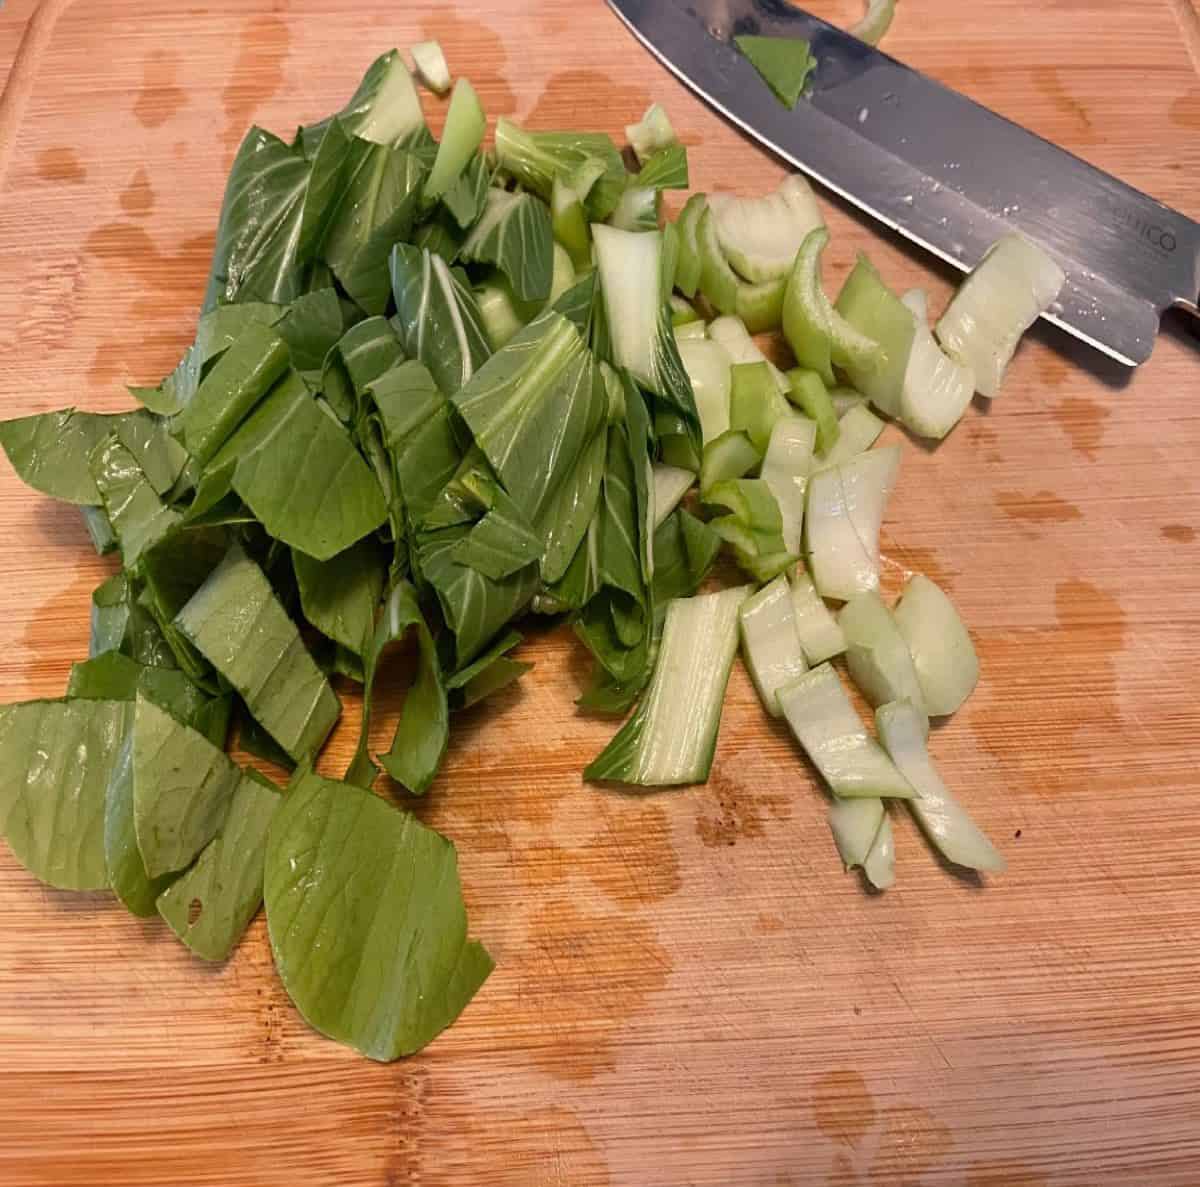 Chopped bok choy into small pieces on a wood cutting board.